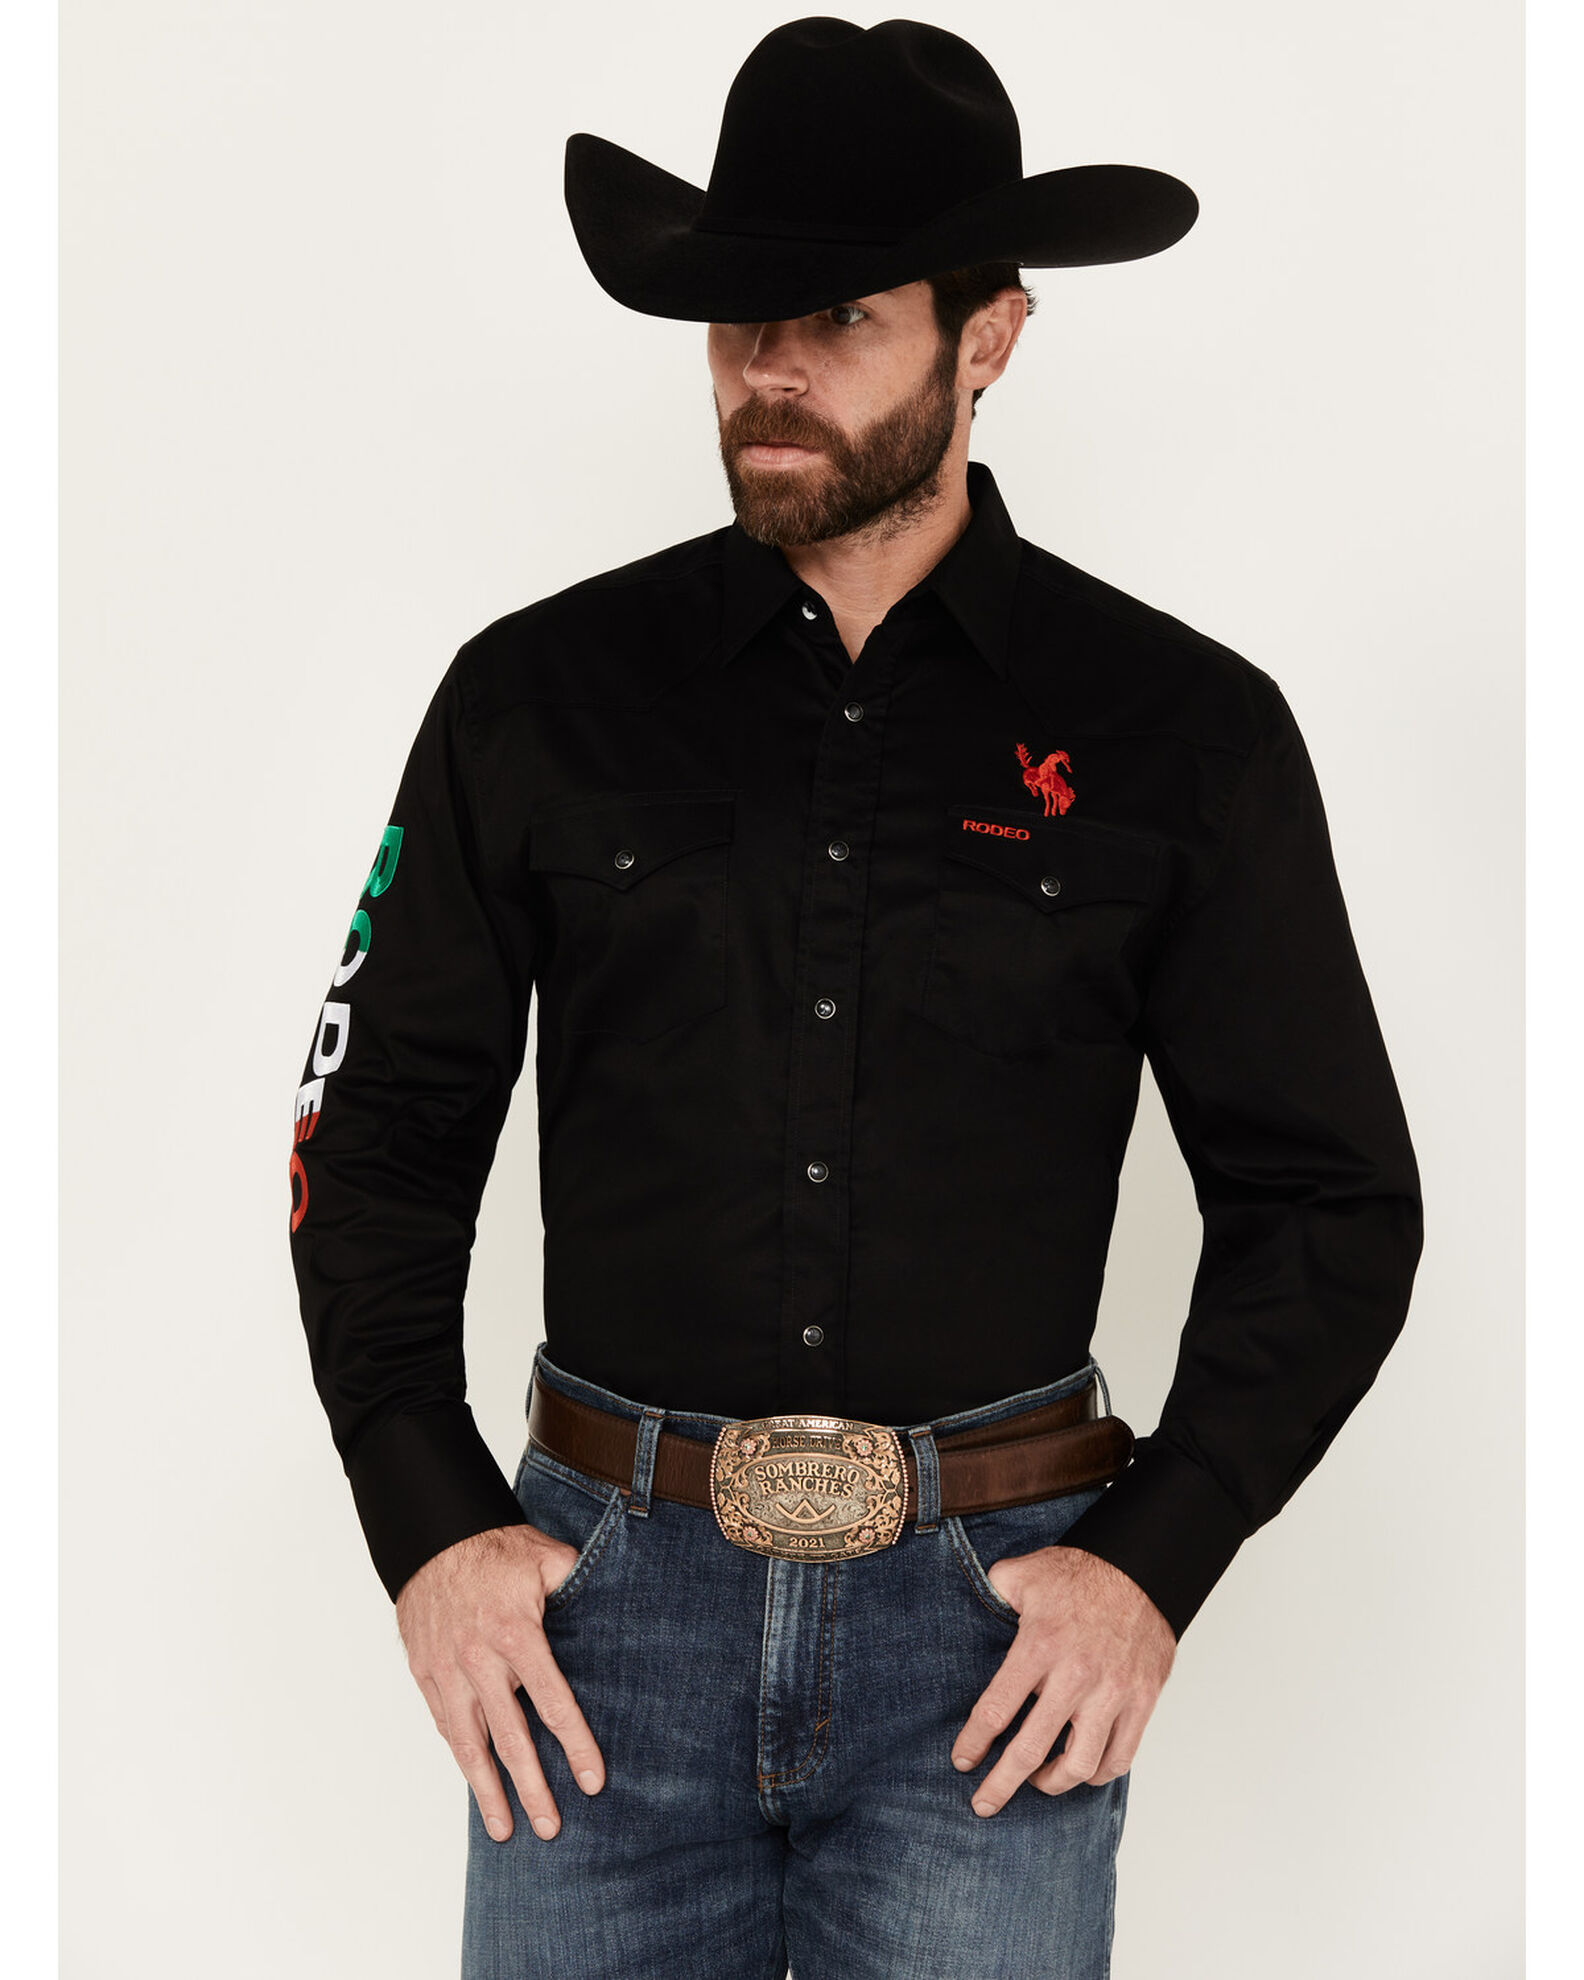 Rodeo Clothing Men's Mexico Bronco Long Sleeve Snap Western Shirt